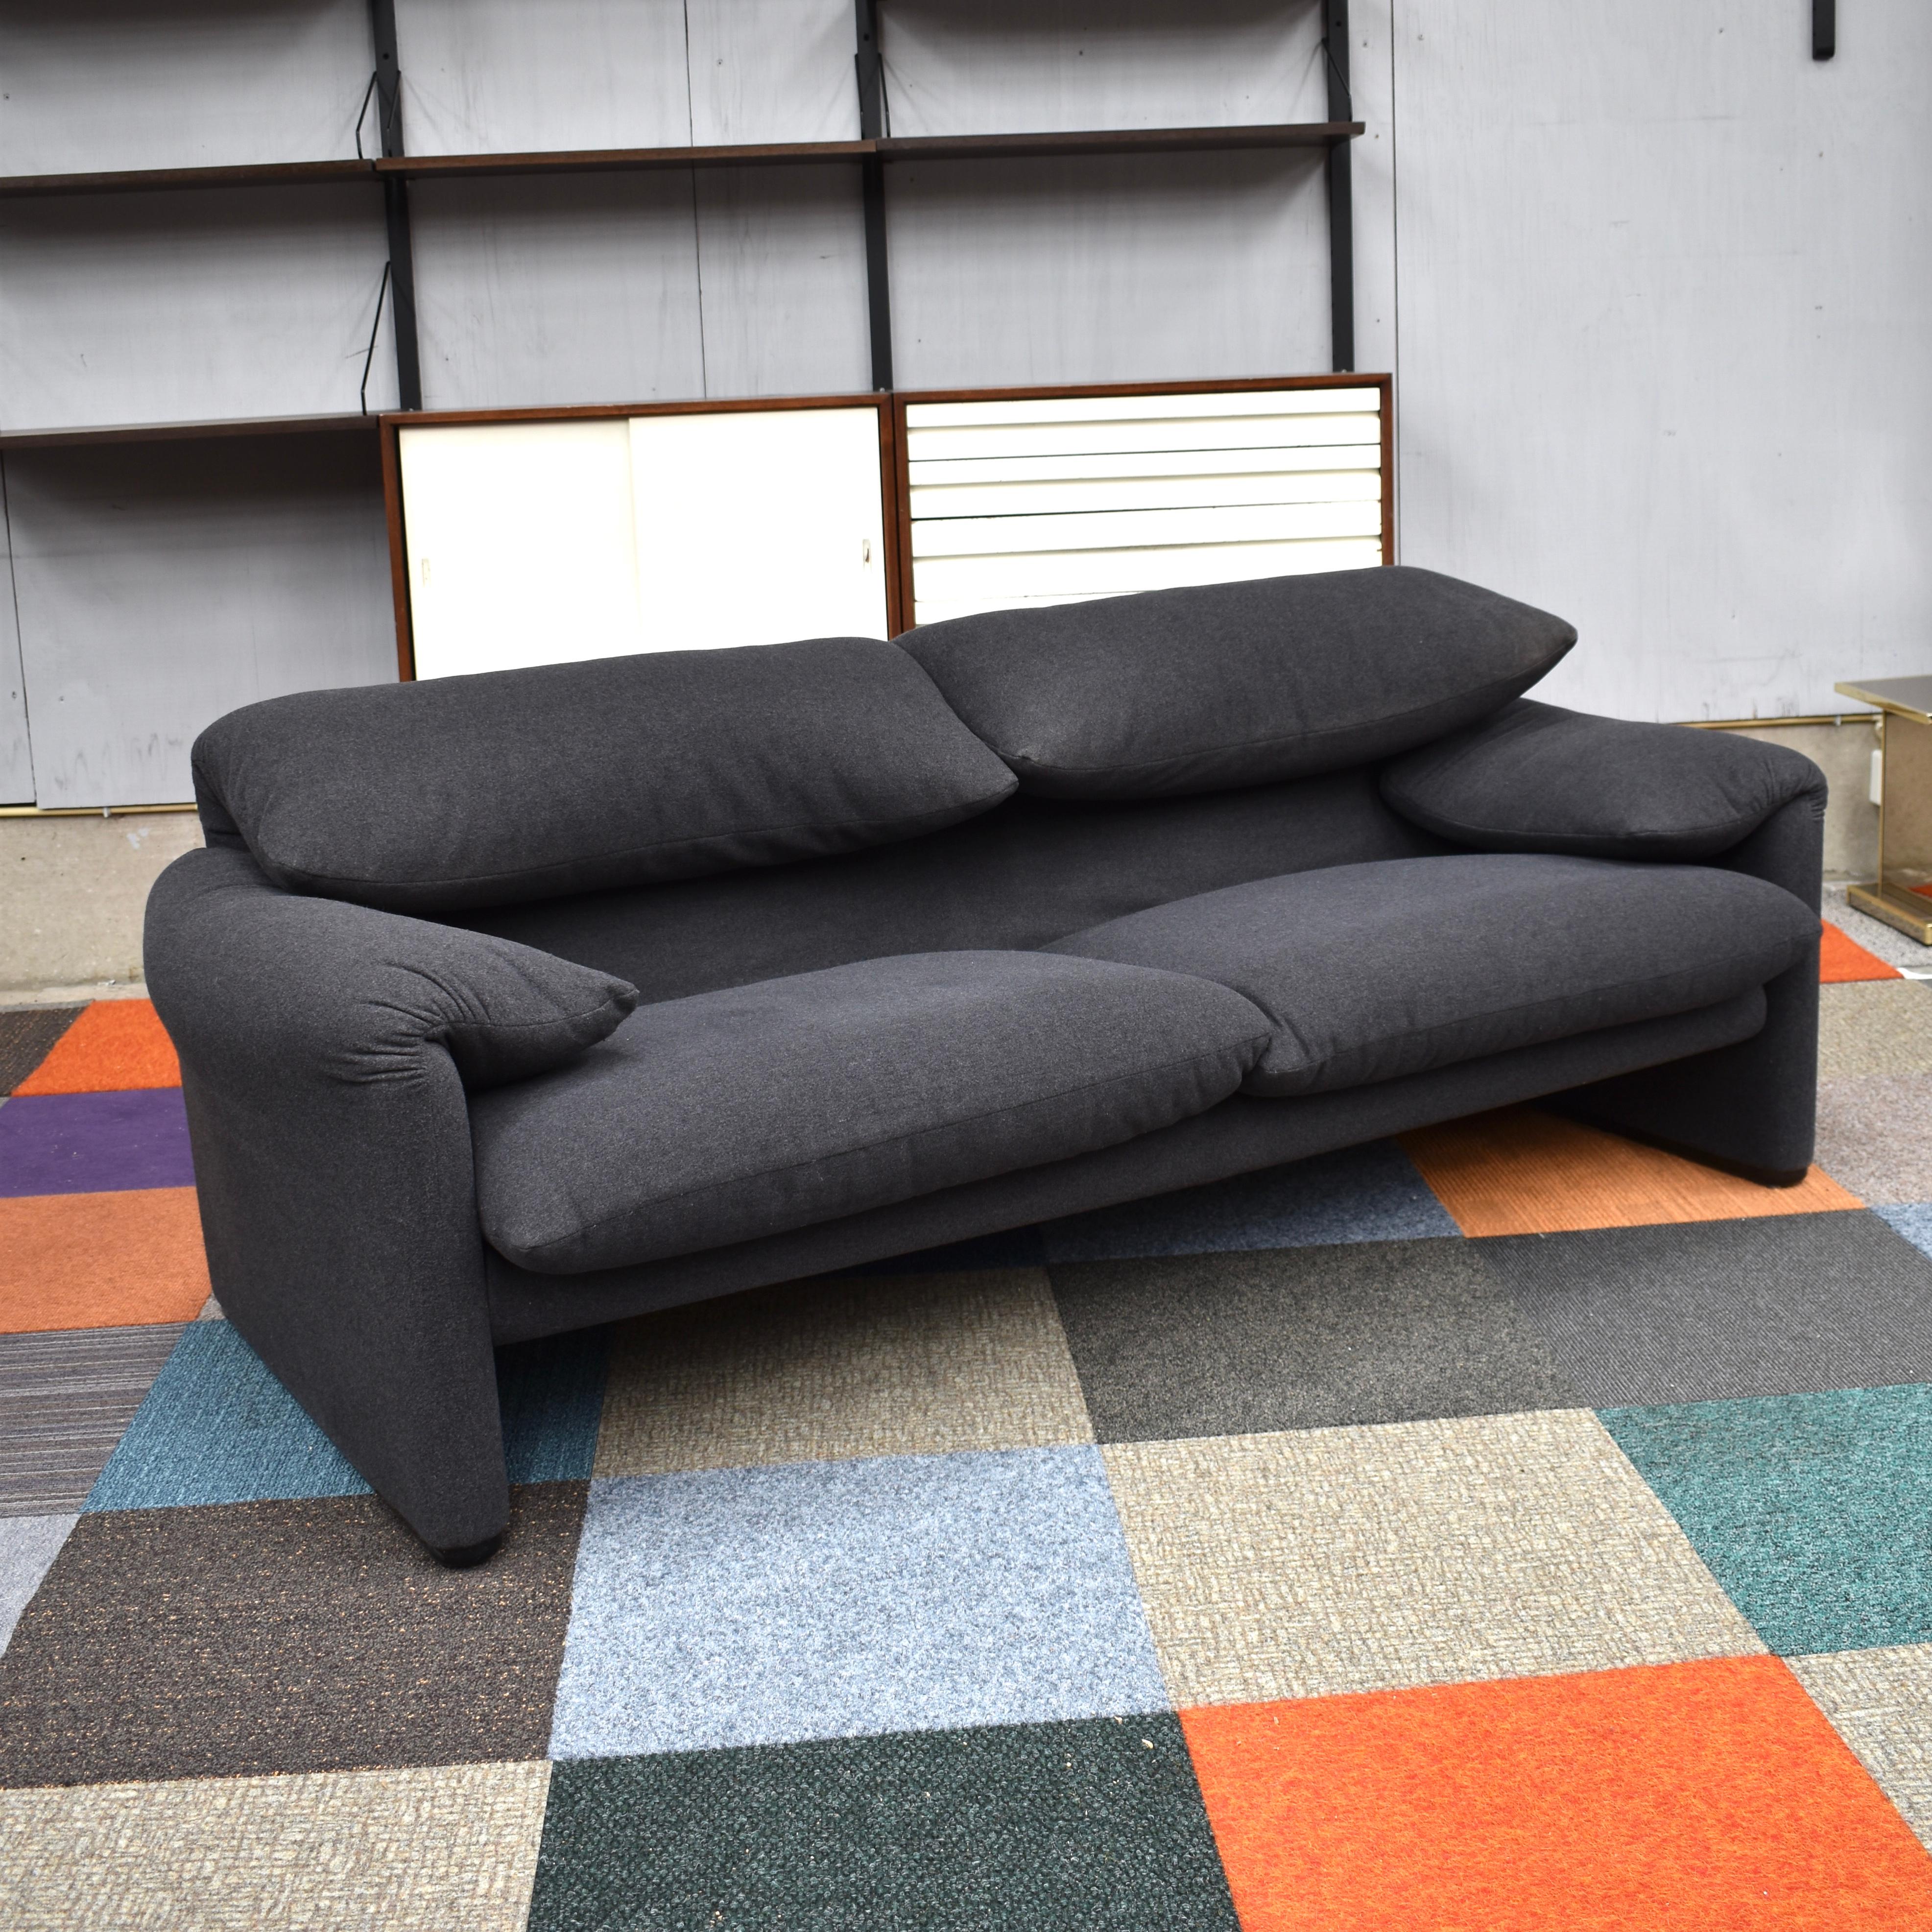 Designer: Vico Magistretti

Manufacturer: CASSINA

Country: Italy

Date of design: 1973

Date of manufacture: 2000-2010

Model: Maralunga sofa

Material: Dark grey felt wool

Size WDH in cm: 195 x 85 x 75 seat height 45